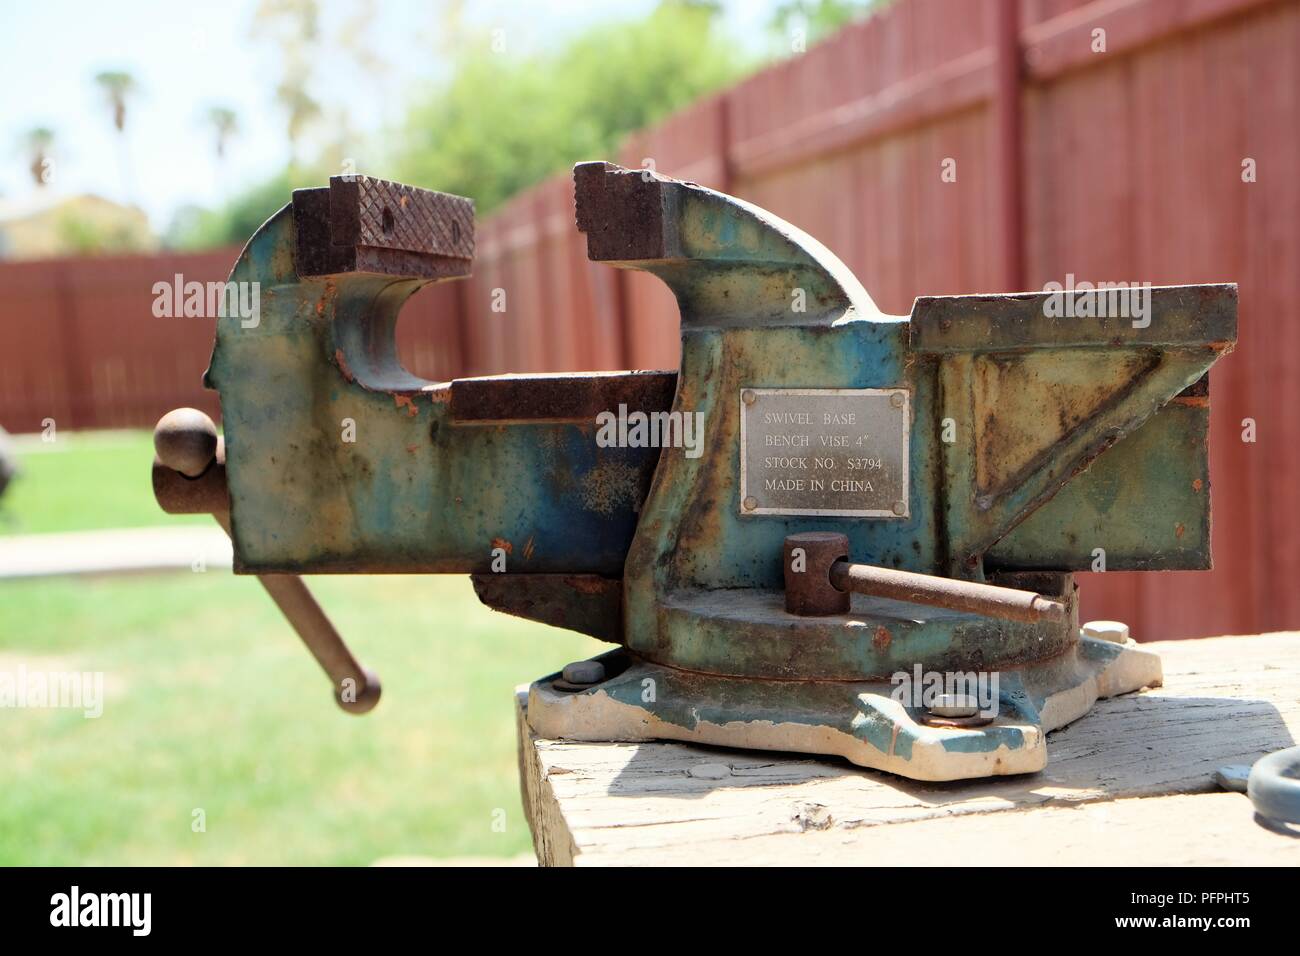 Rusted swivel base 4-inch vise bolted on a wooden table. Stock Photo